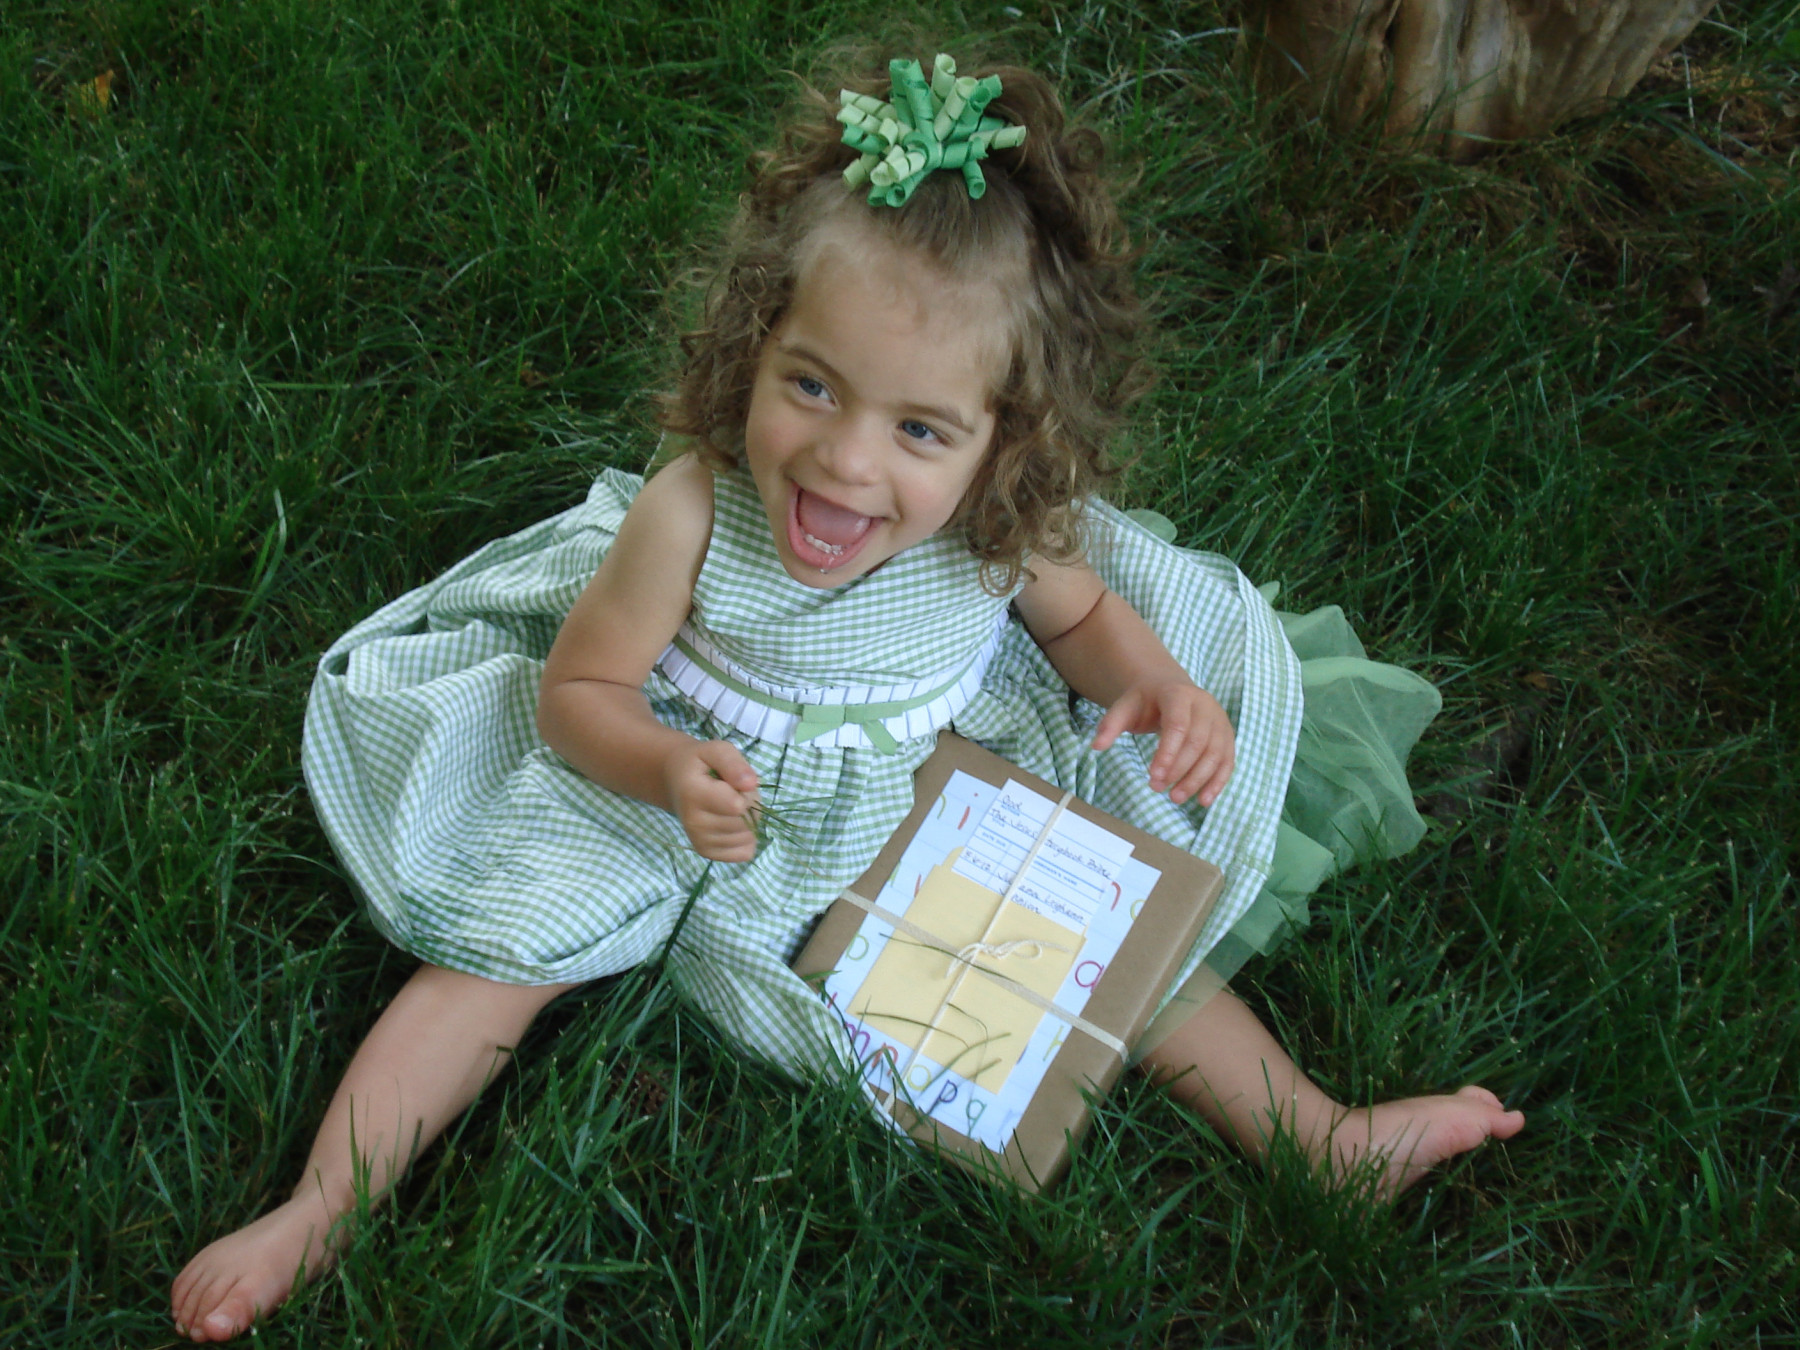 Angelman child's happy demeanor | Angelman Syndrome News | Juliana sits on the grass in a pretty green dress with a green bow on her head while flashing a smile. She is opening a gift.